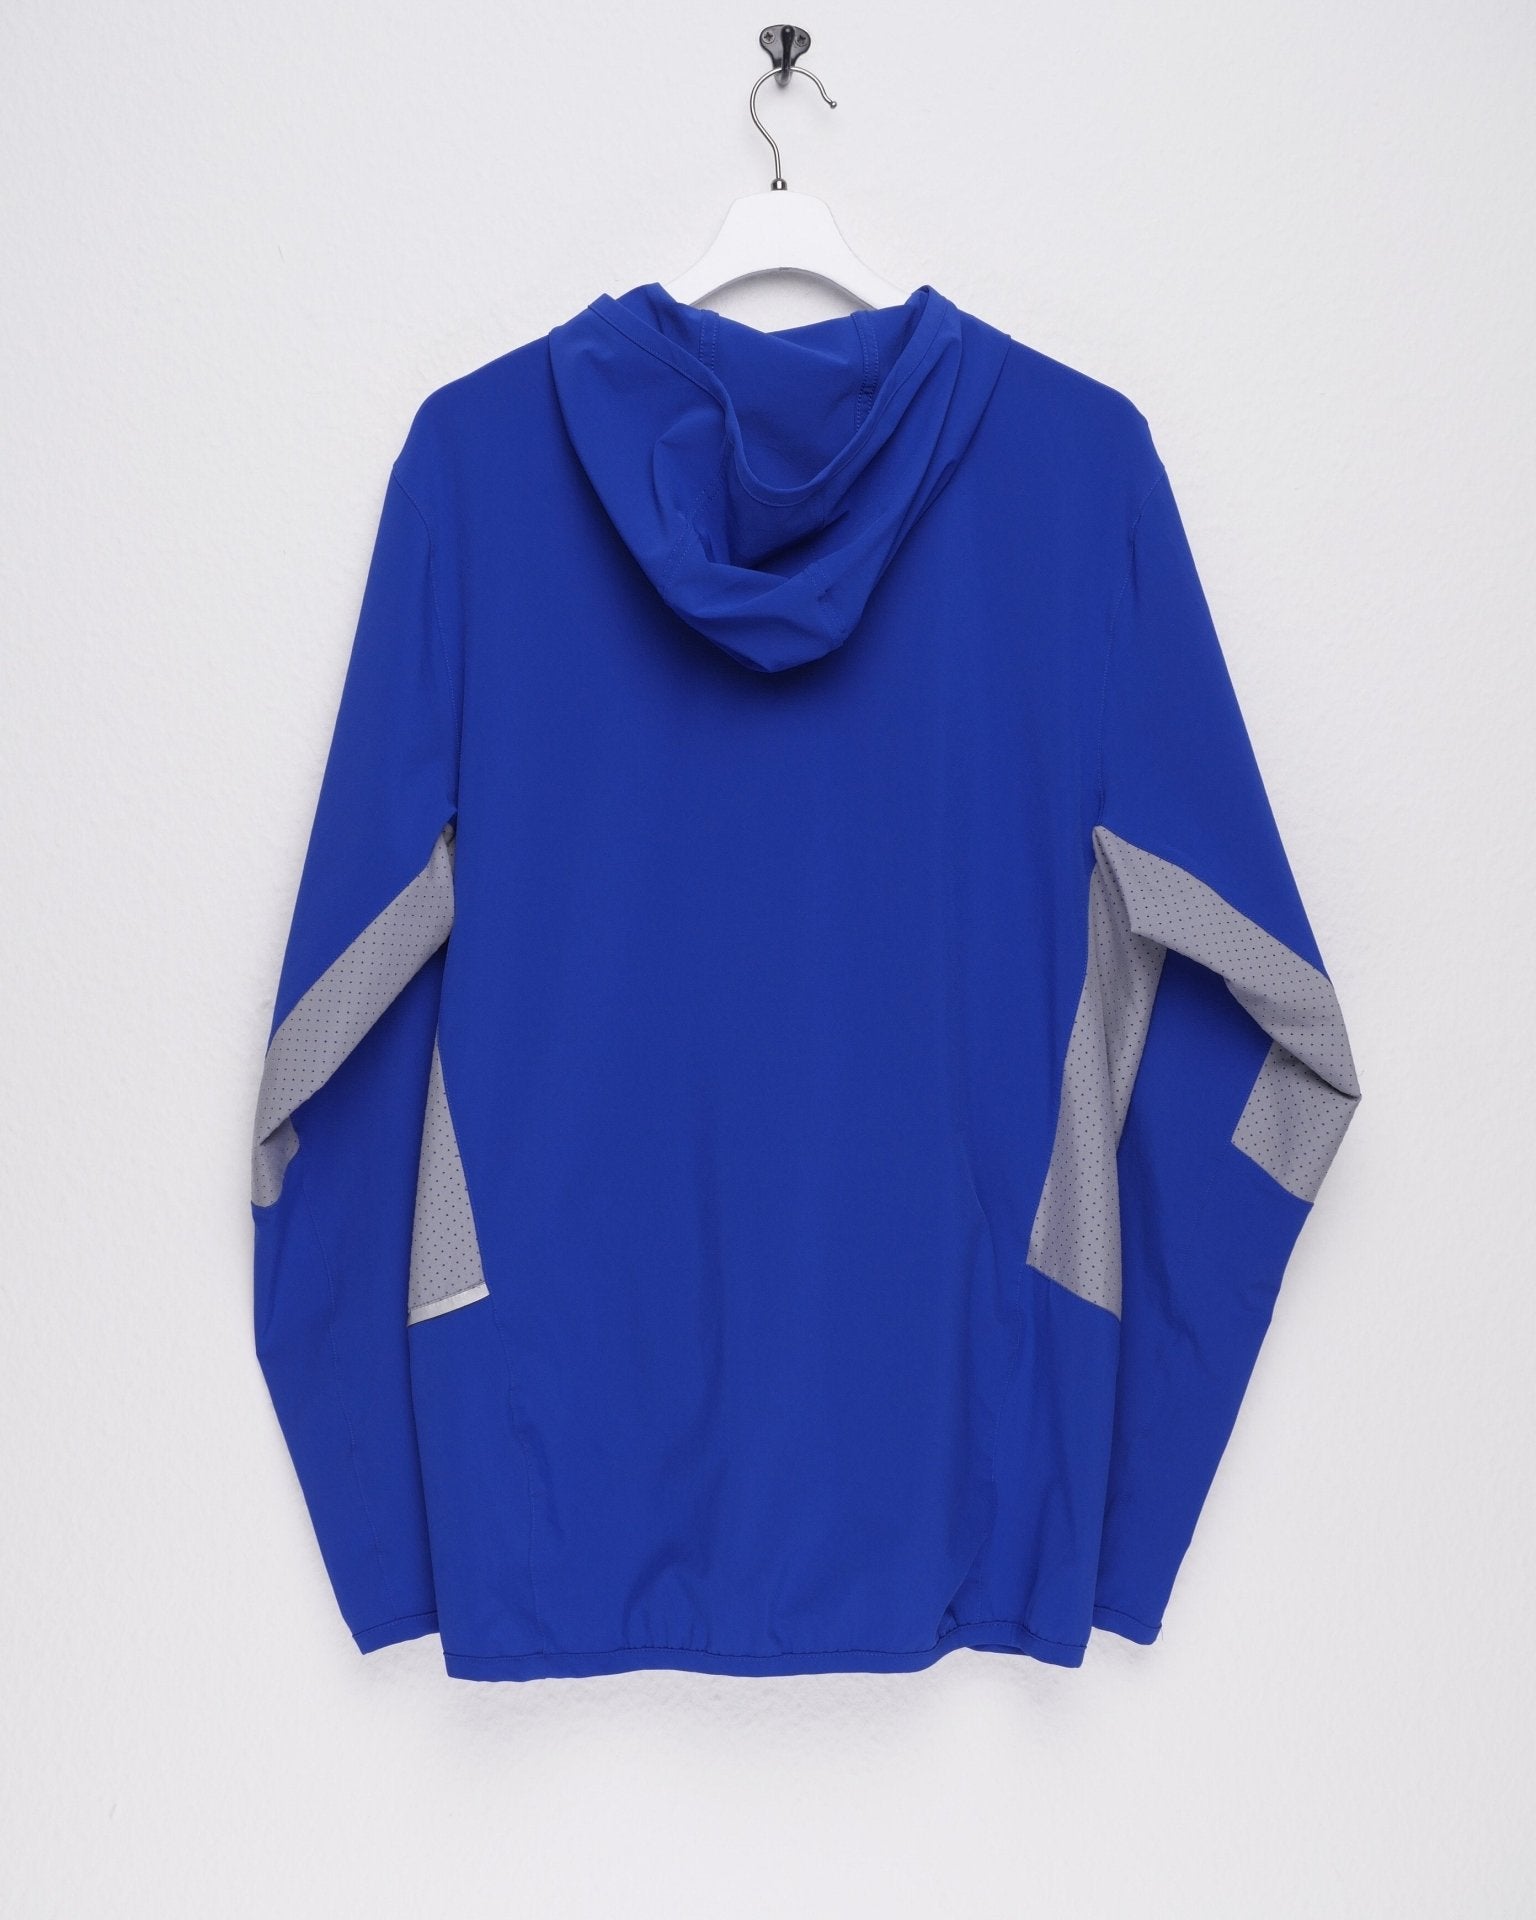 under amour embroidered Logo blue Half Zip Jersey Hoodie - Peeces